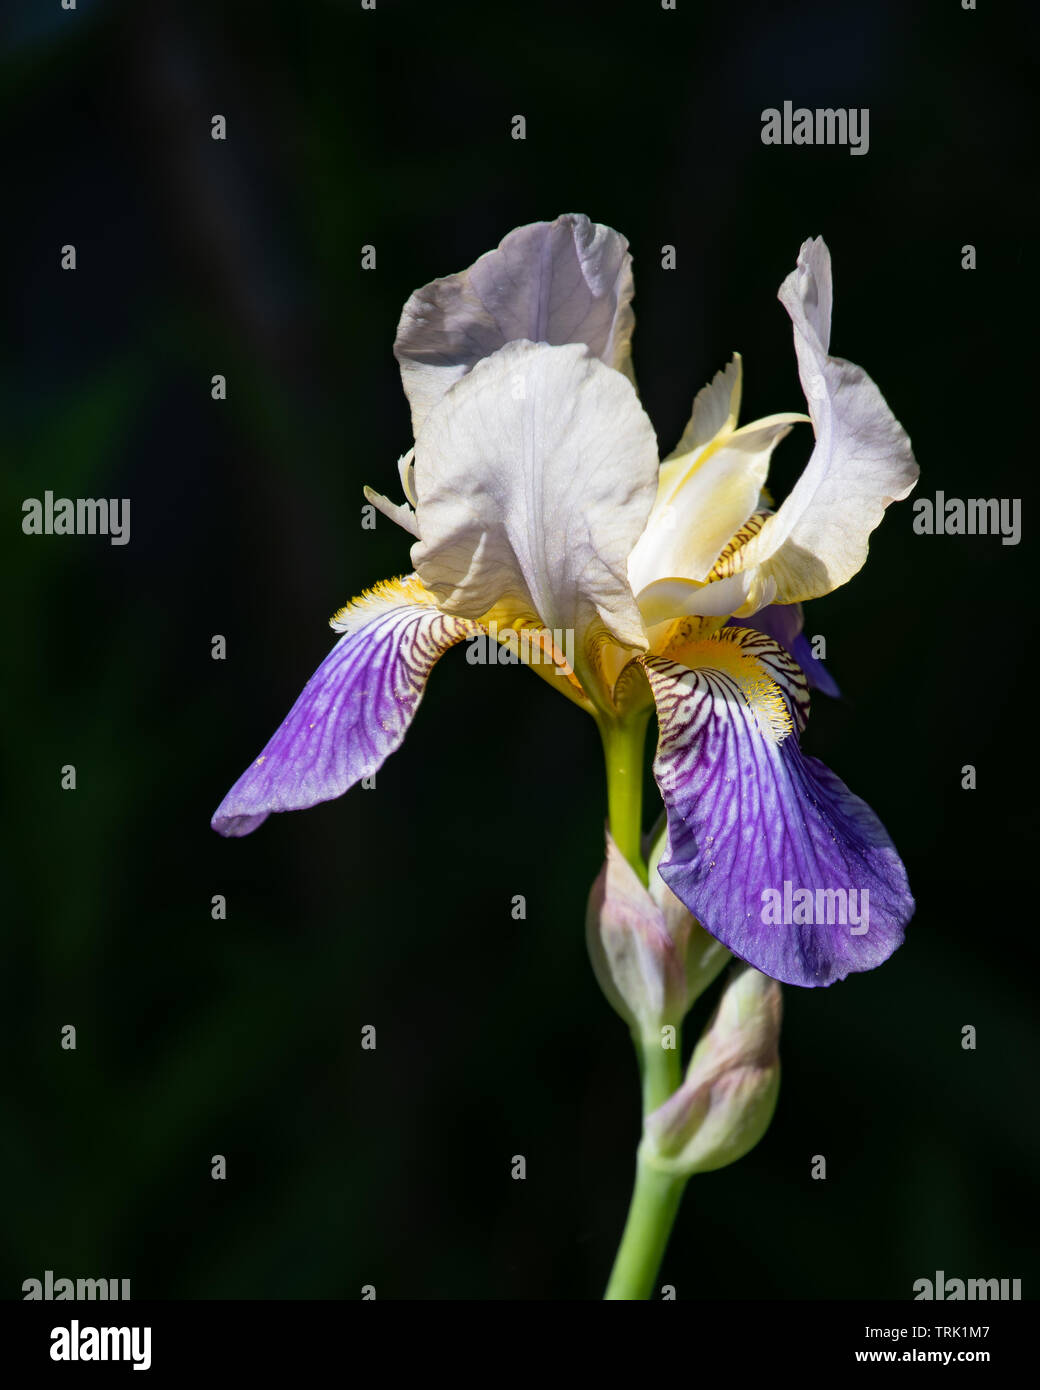 A sun lit blue and white bearded iris flower in the garden with a dark shadow background Stock Photo